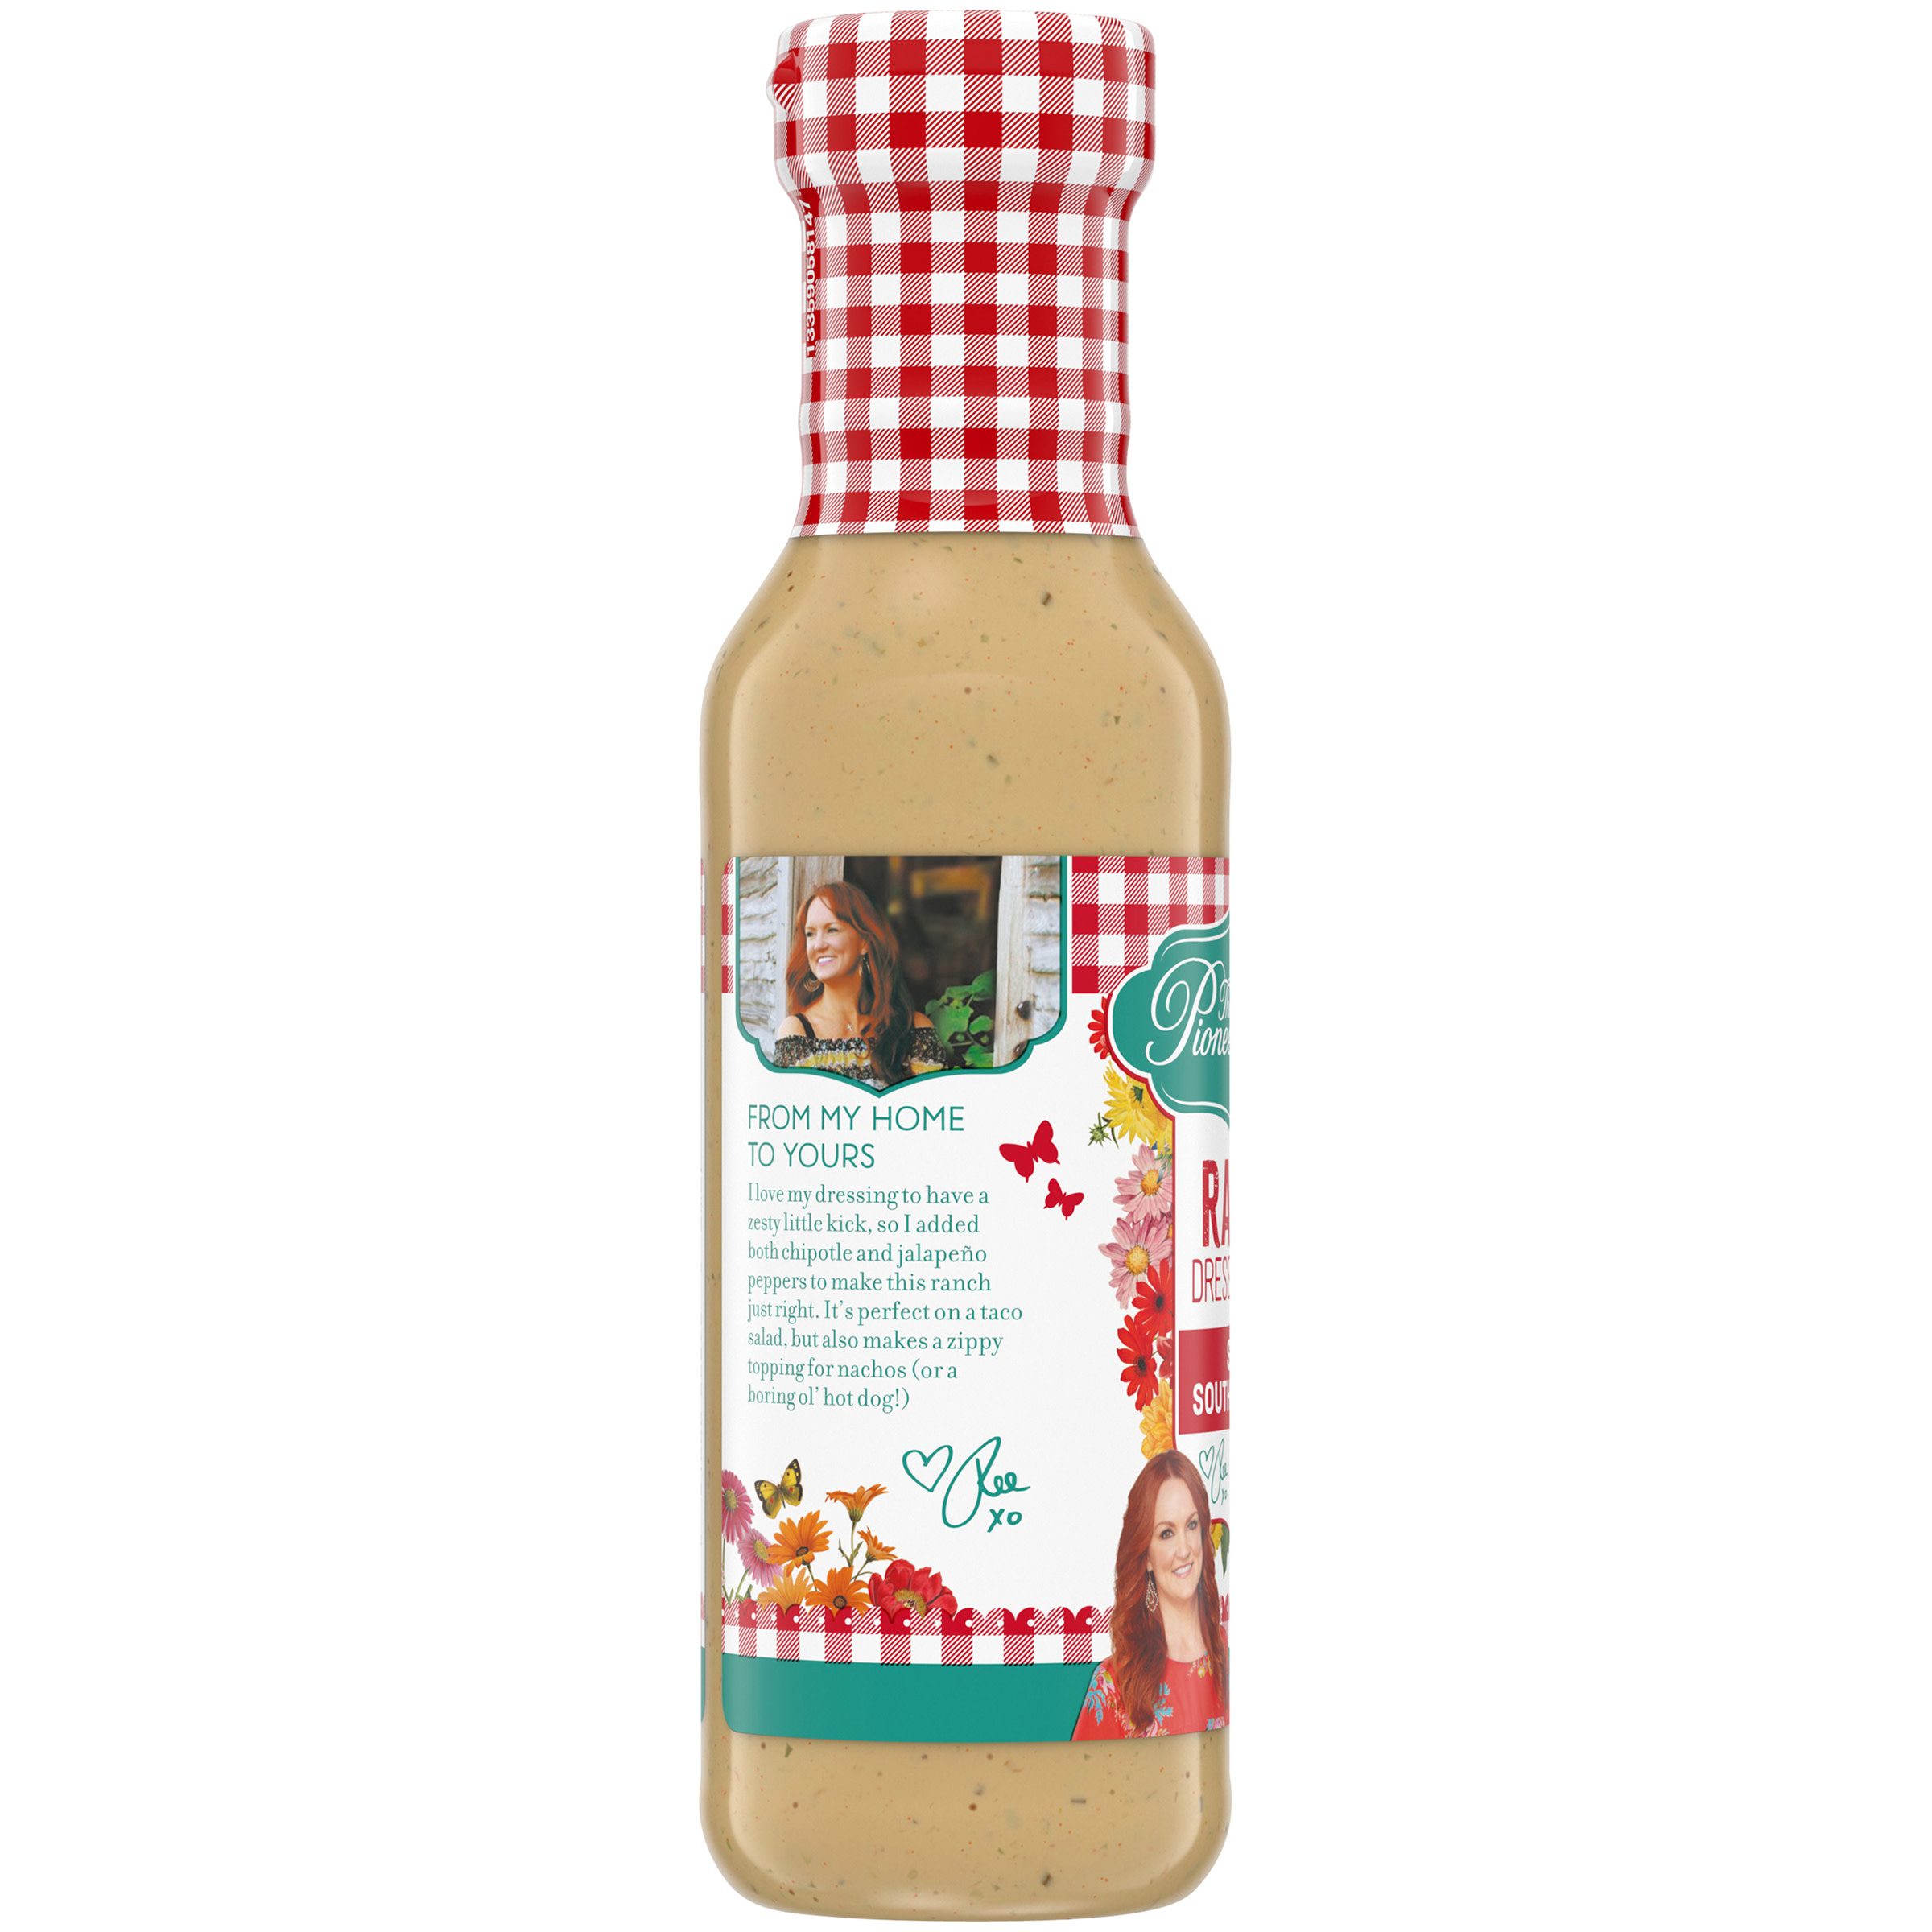 The Pioneer Woman Spicy Southwestern Ranch Salad Dressing & Dip, 12 fl oz Bottle - image 6 of 8